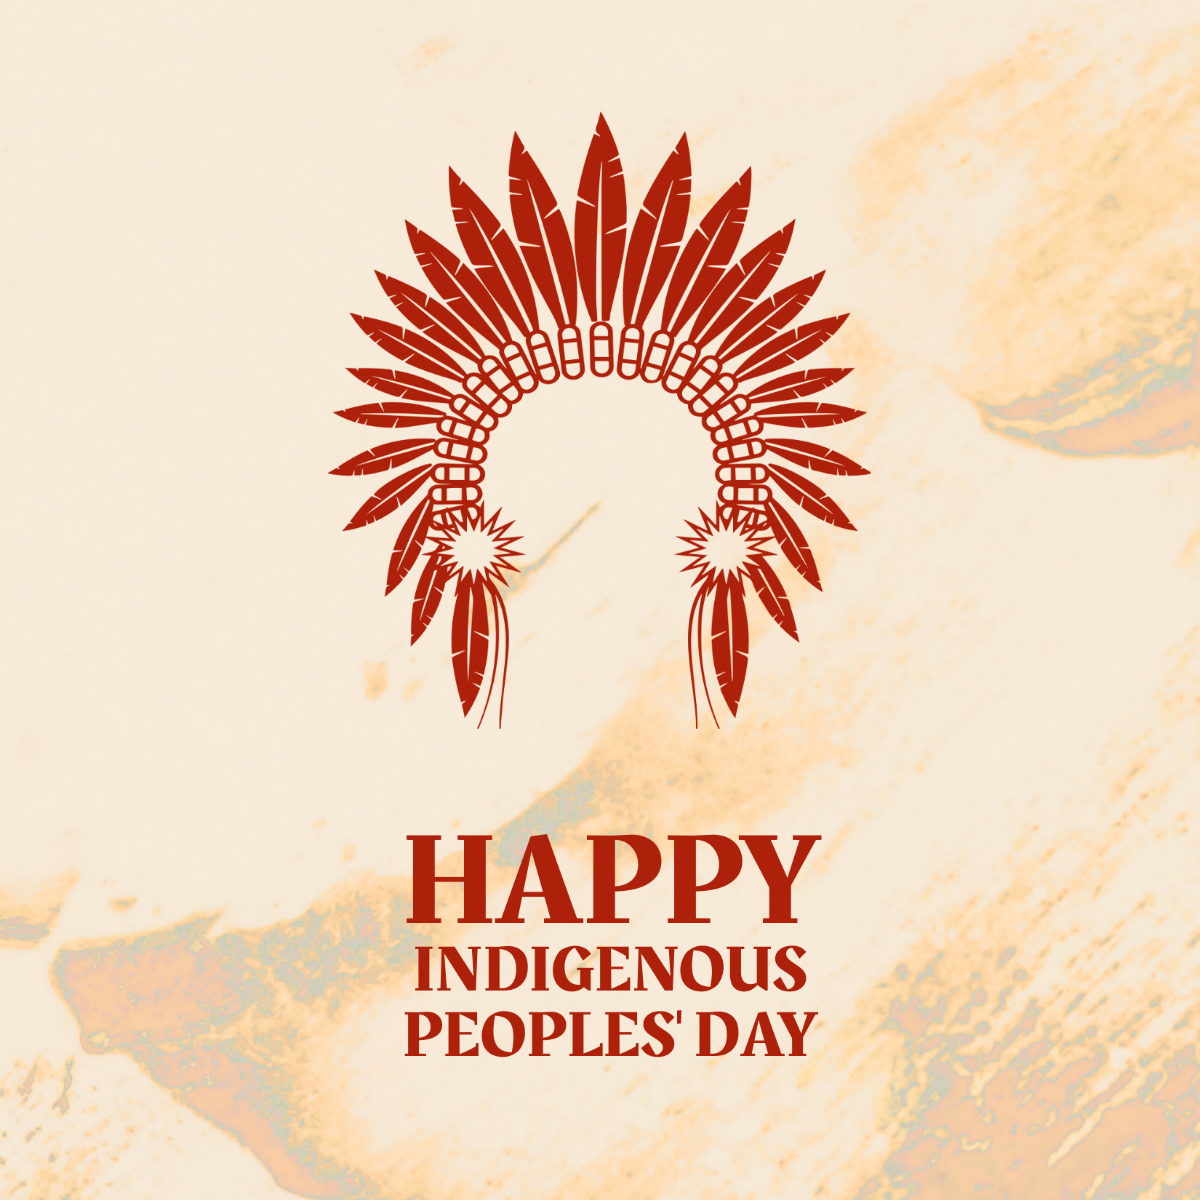 Free Indigenous Peoples' Day Instagram Post Template